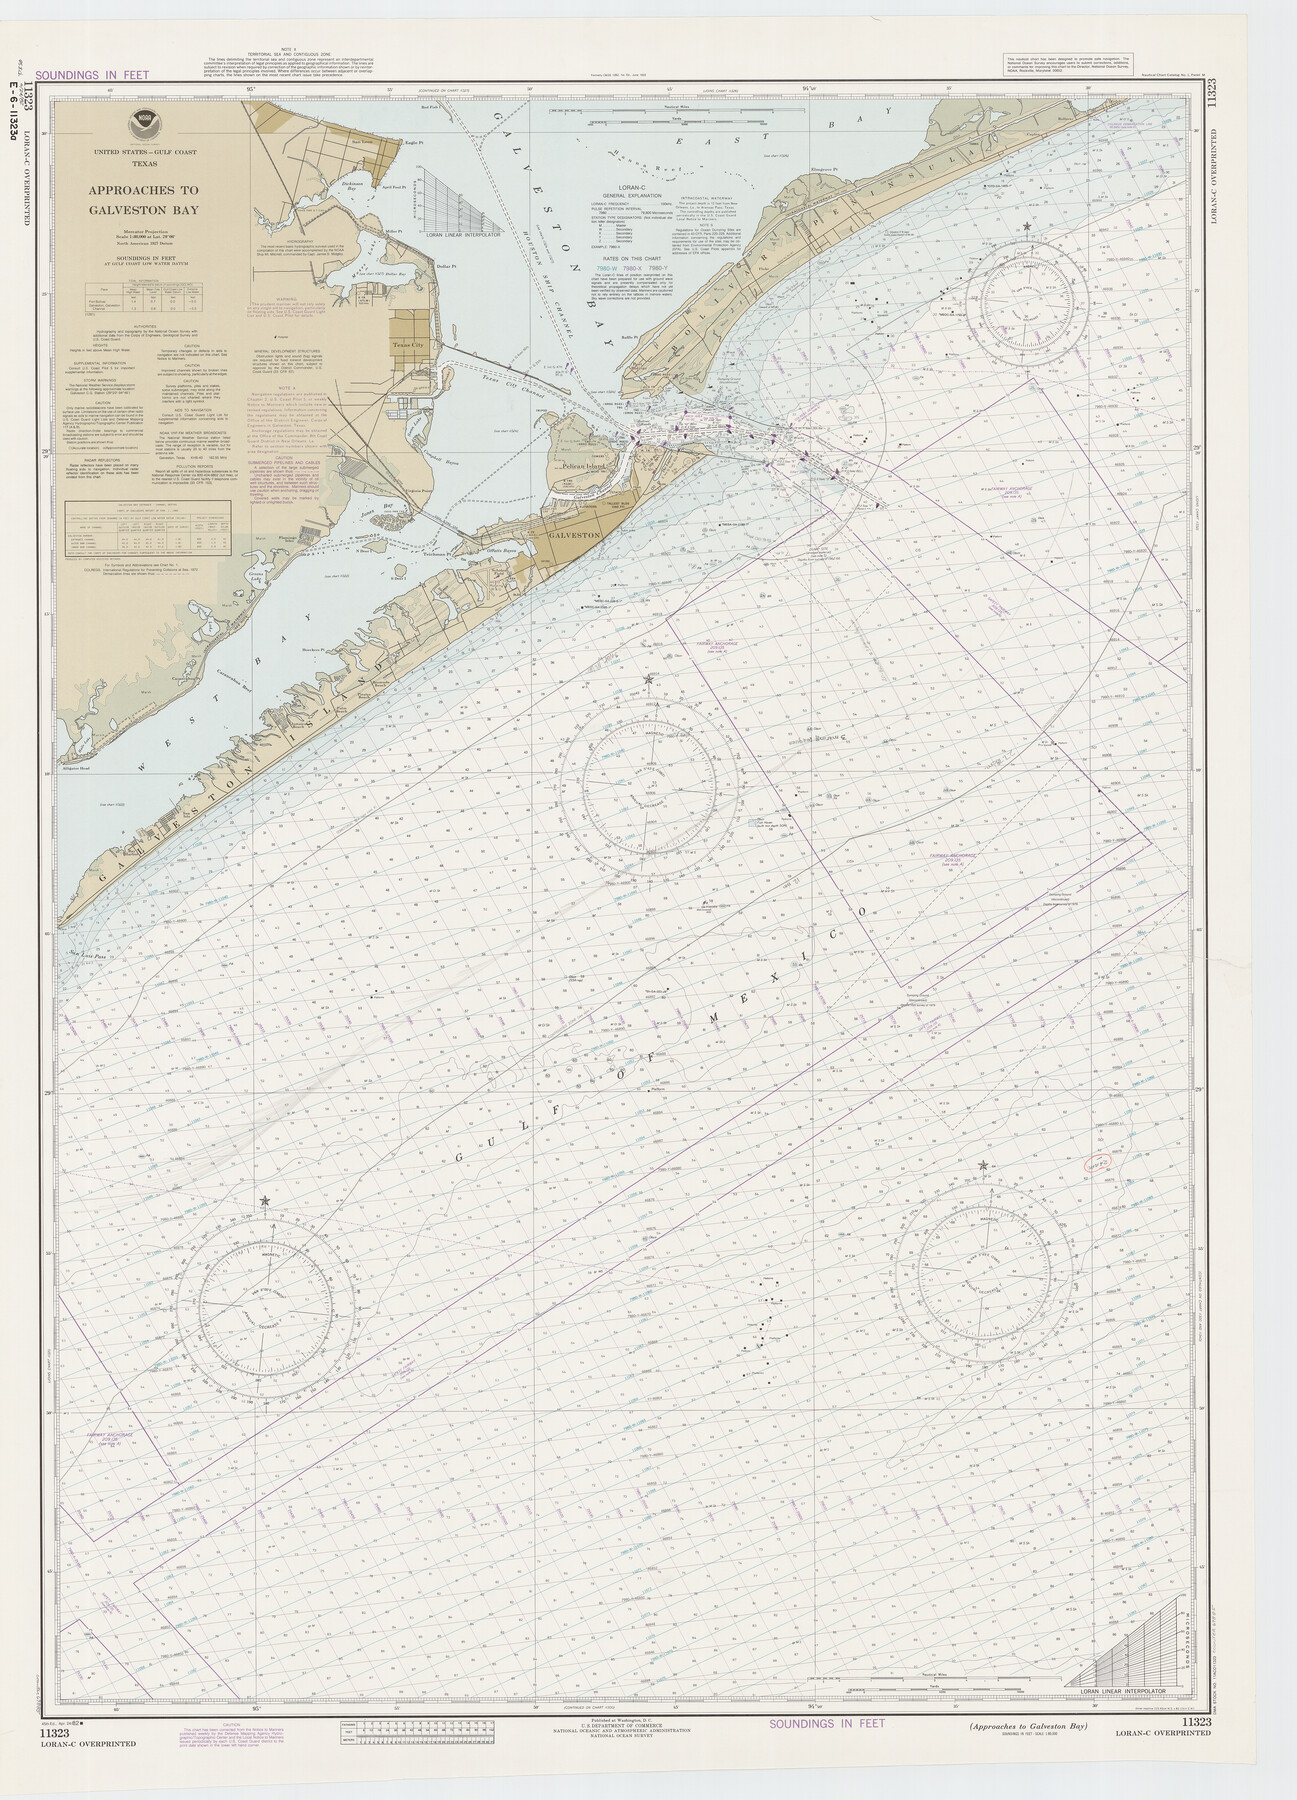 69885, Galveston Bay and Approaches, General Map Collection